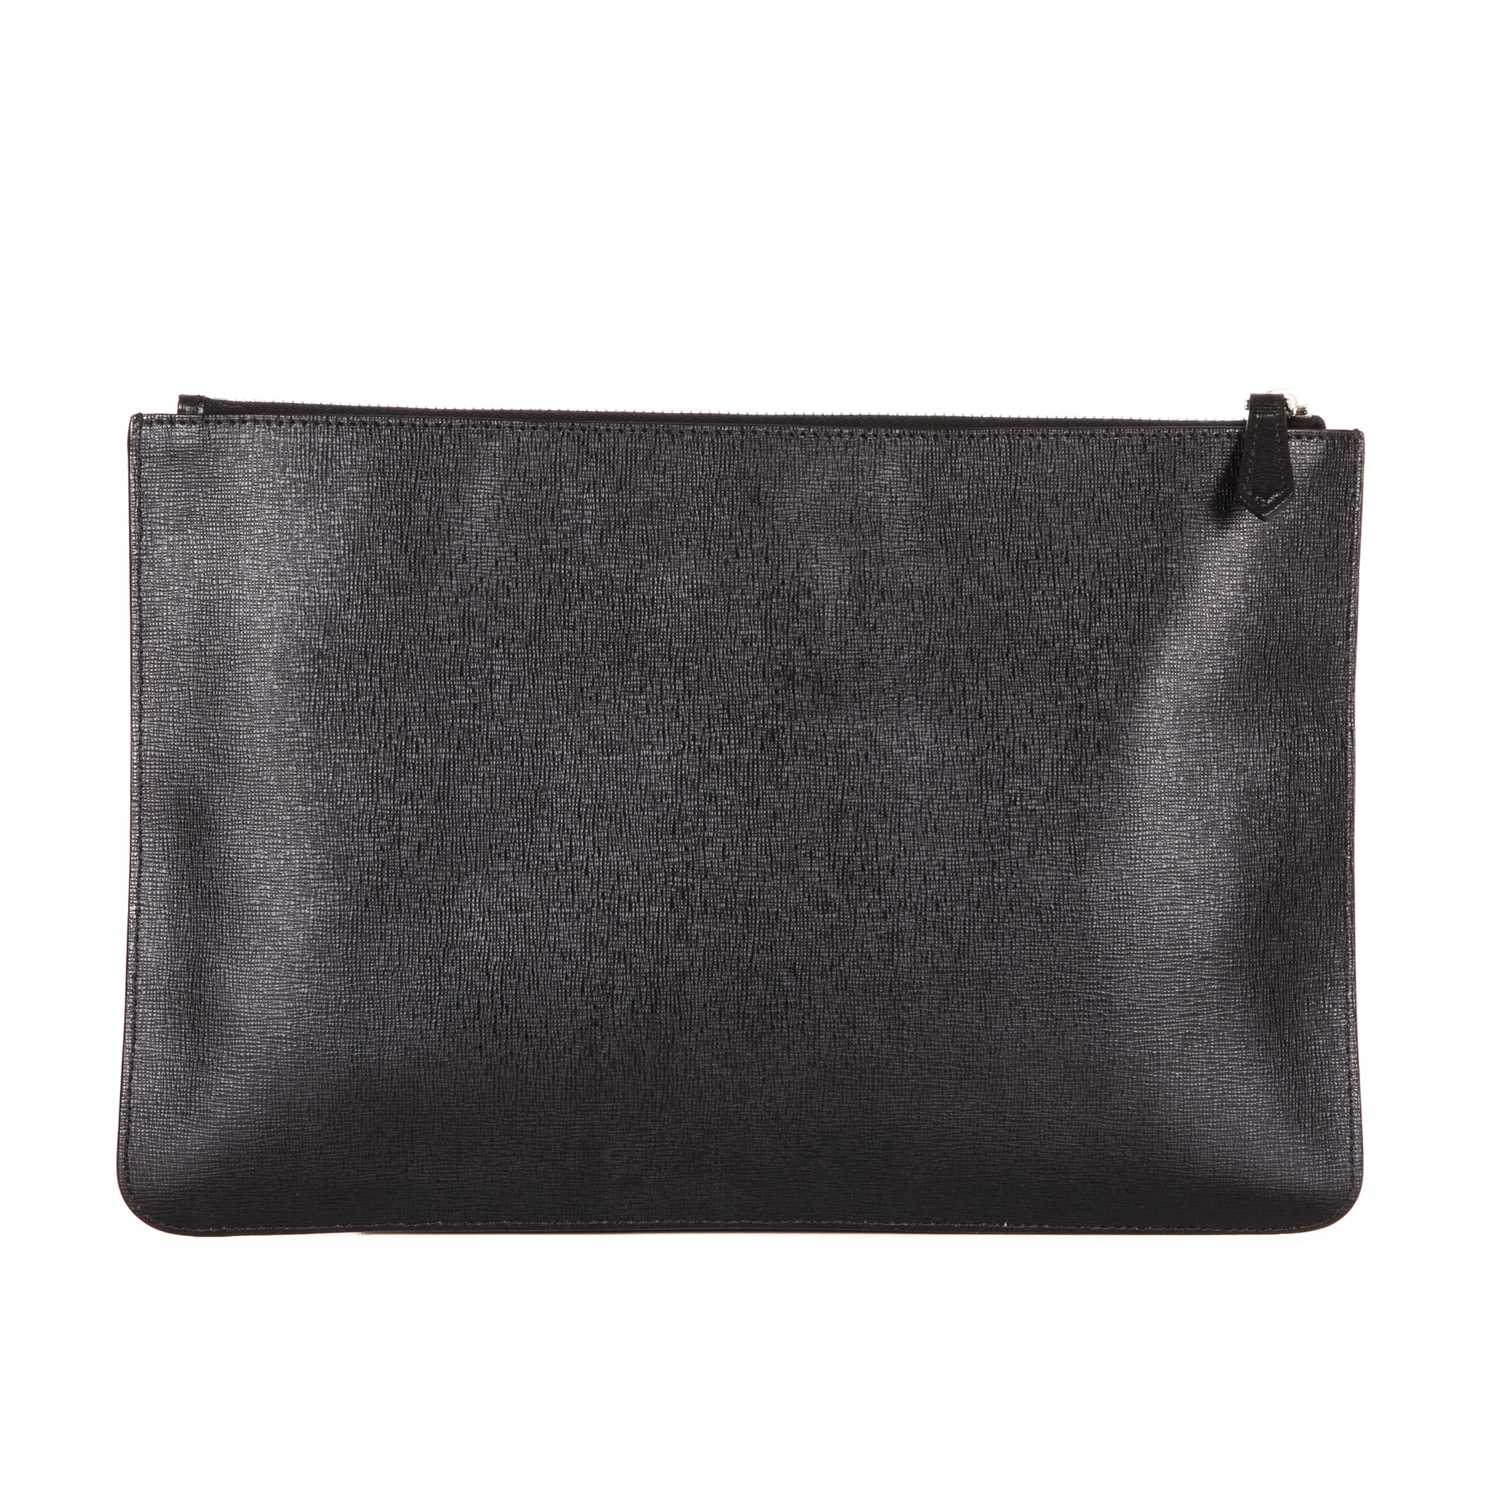 Fendi, a Karlito clutch, crafted from black saffiano leather with silver-tone studded trim, - Image 2 of 2